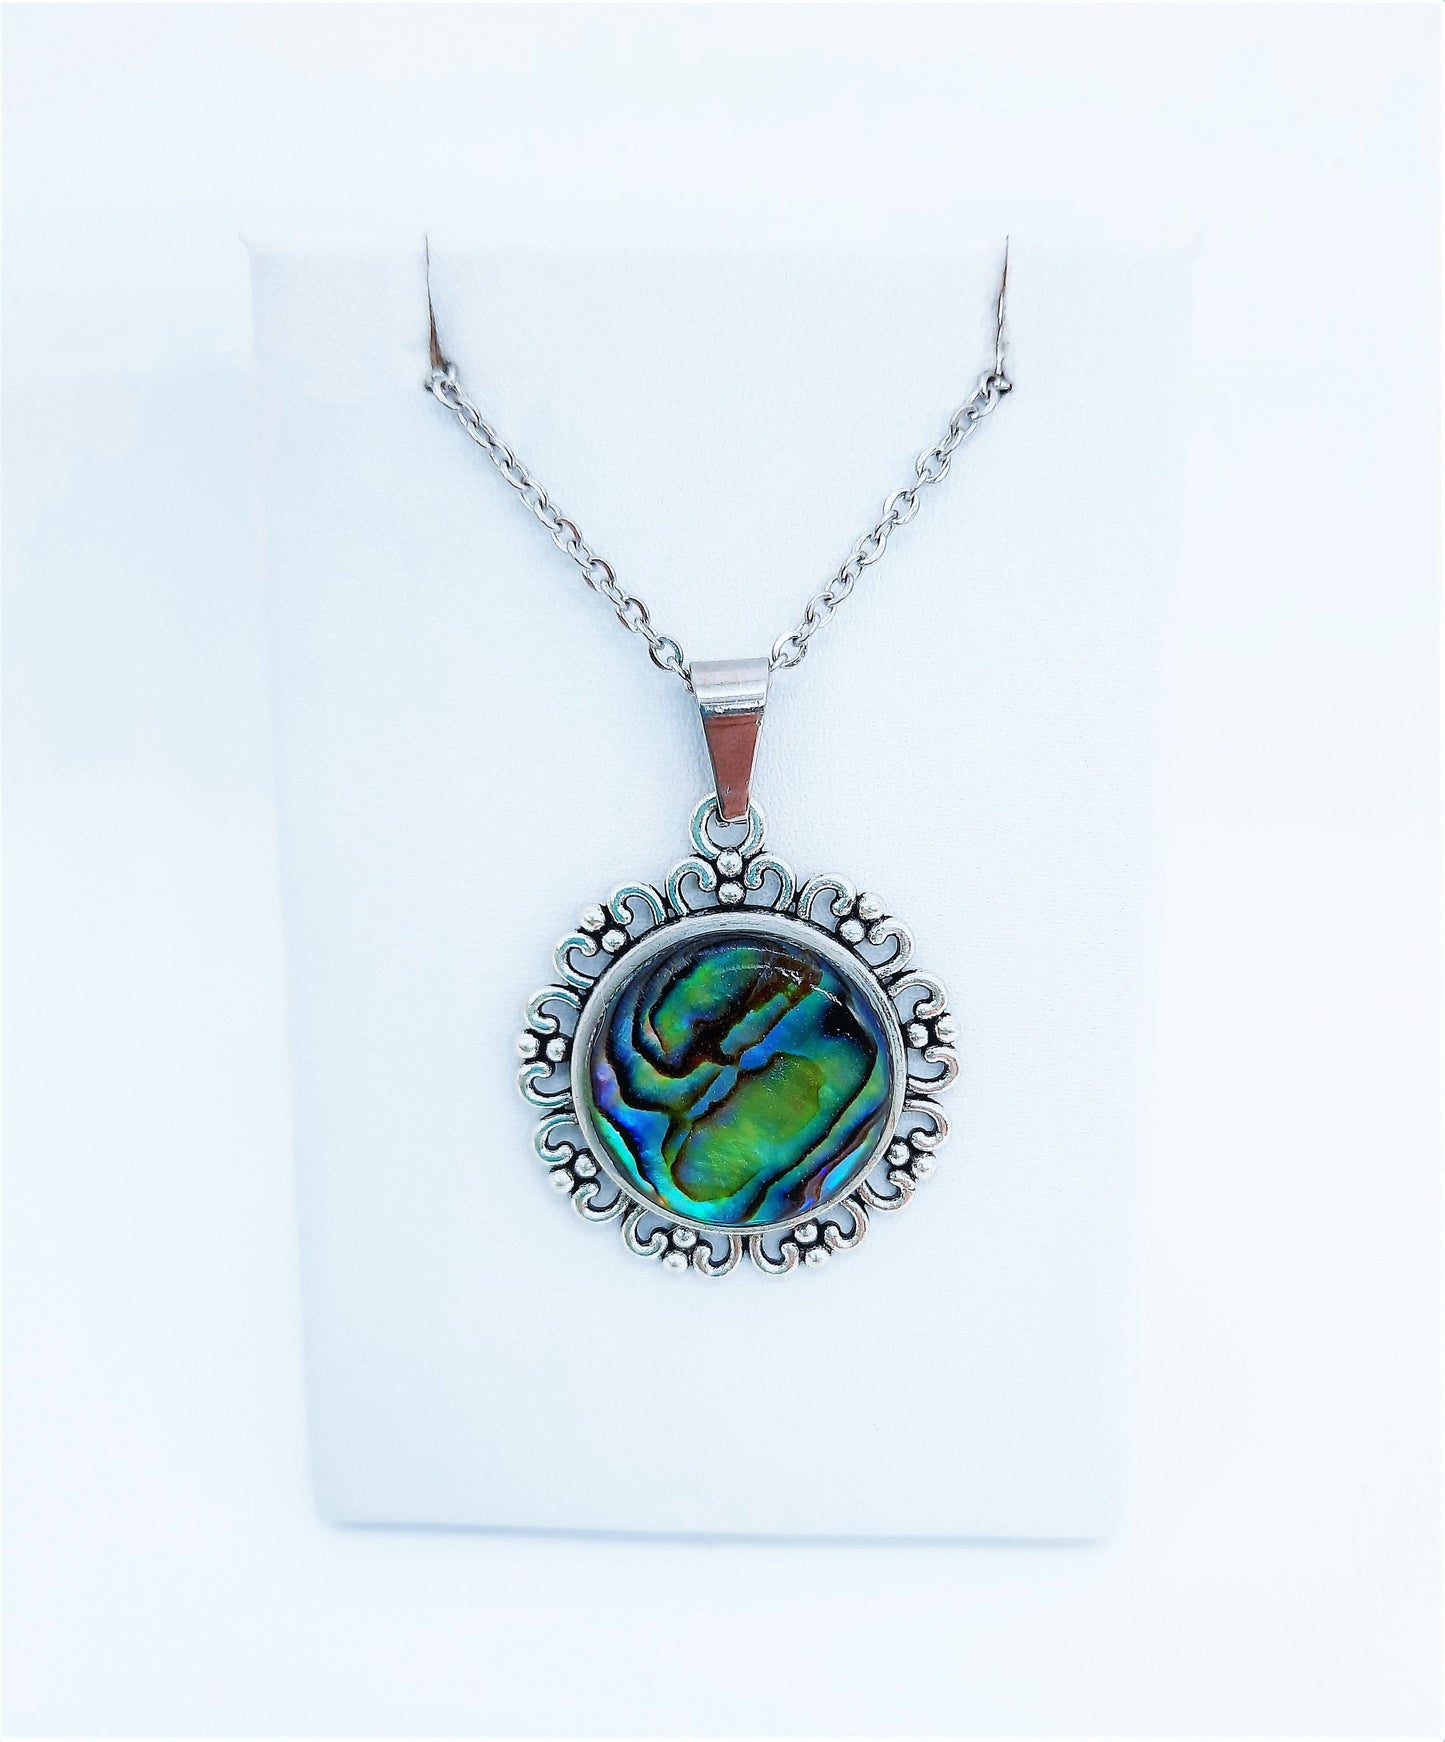 Abalone / Paua Seashell Tibetan Style Pendant Necklace - Stainless Steel - Hypoallergenic - Covered with Holographic Powder Infused Resin